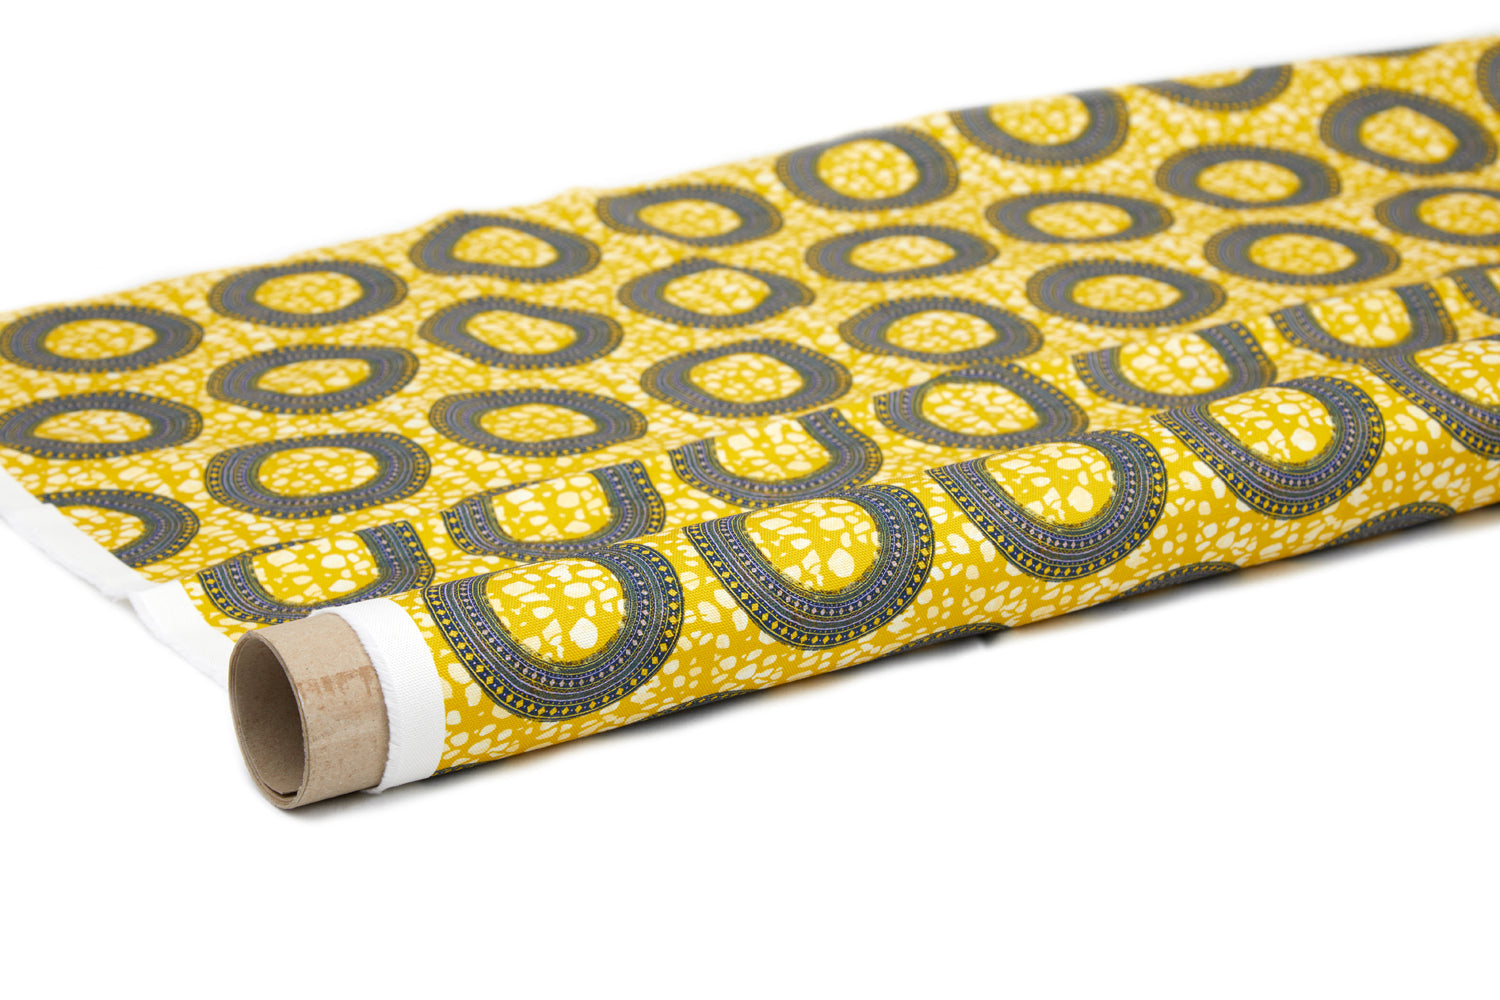 Partially unrolled fabric in an intricate circular print in shades of yellow, blue and white.